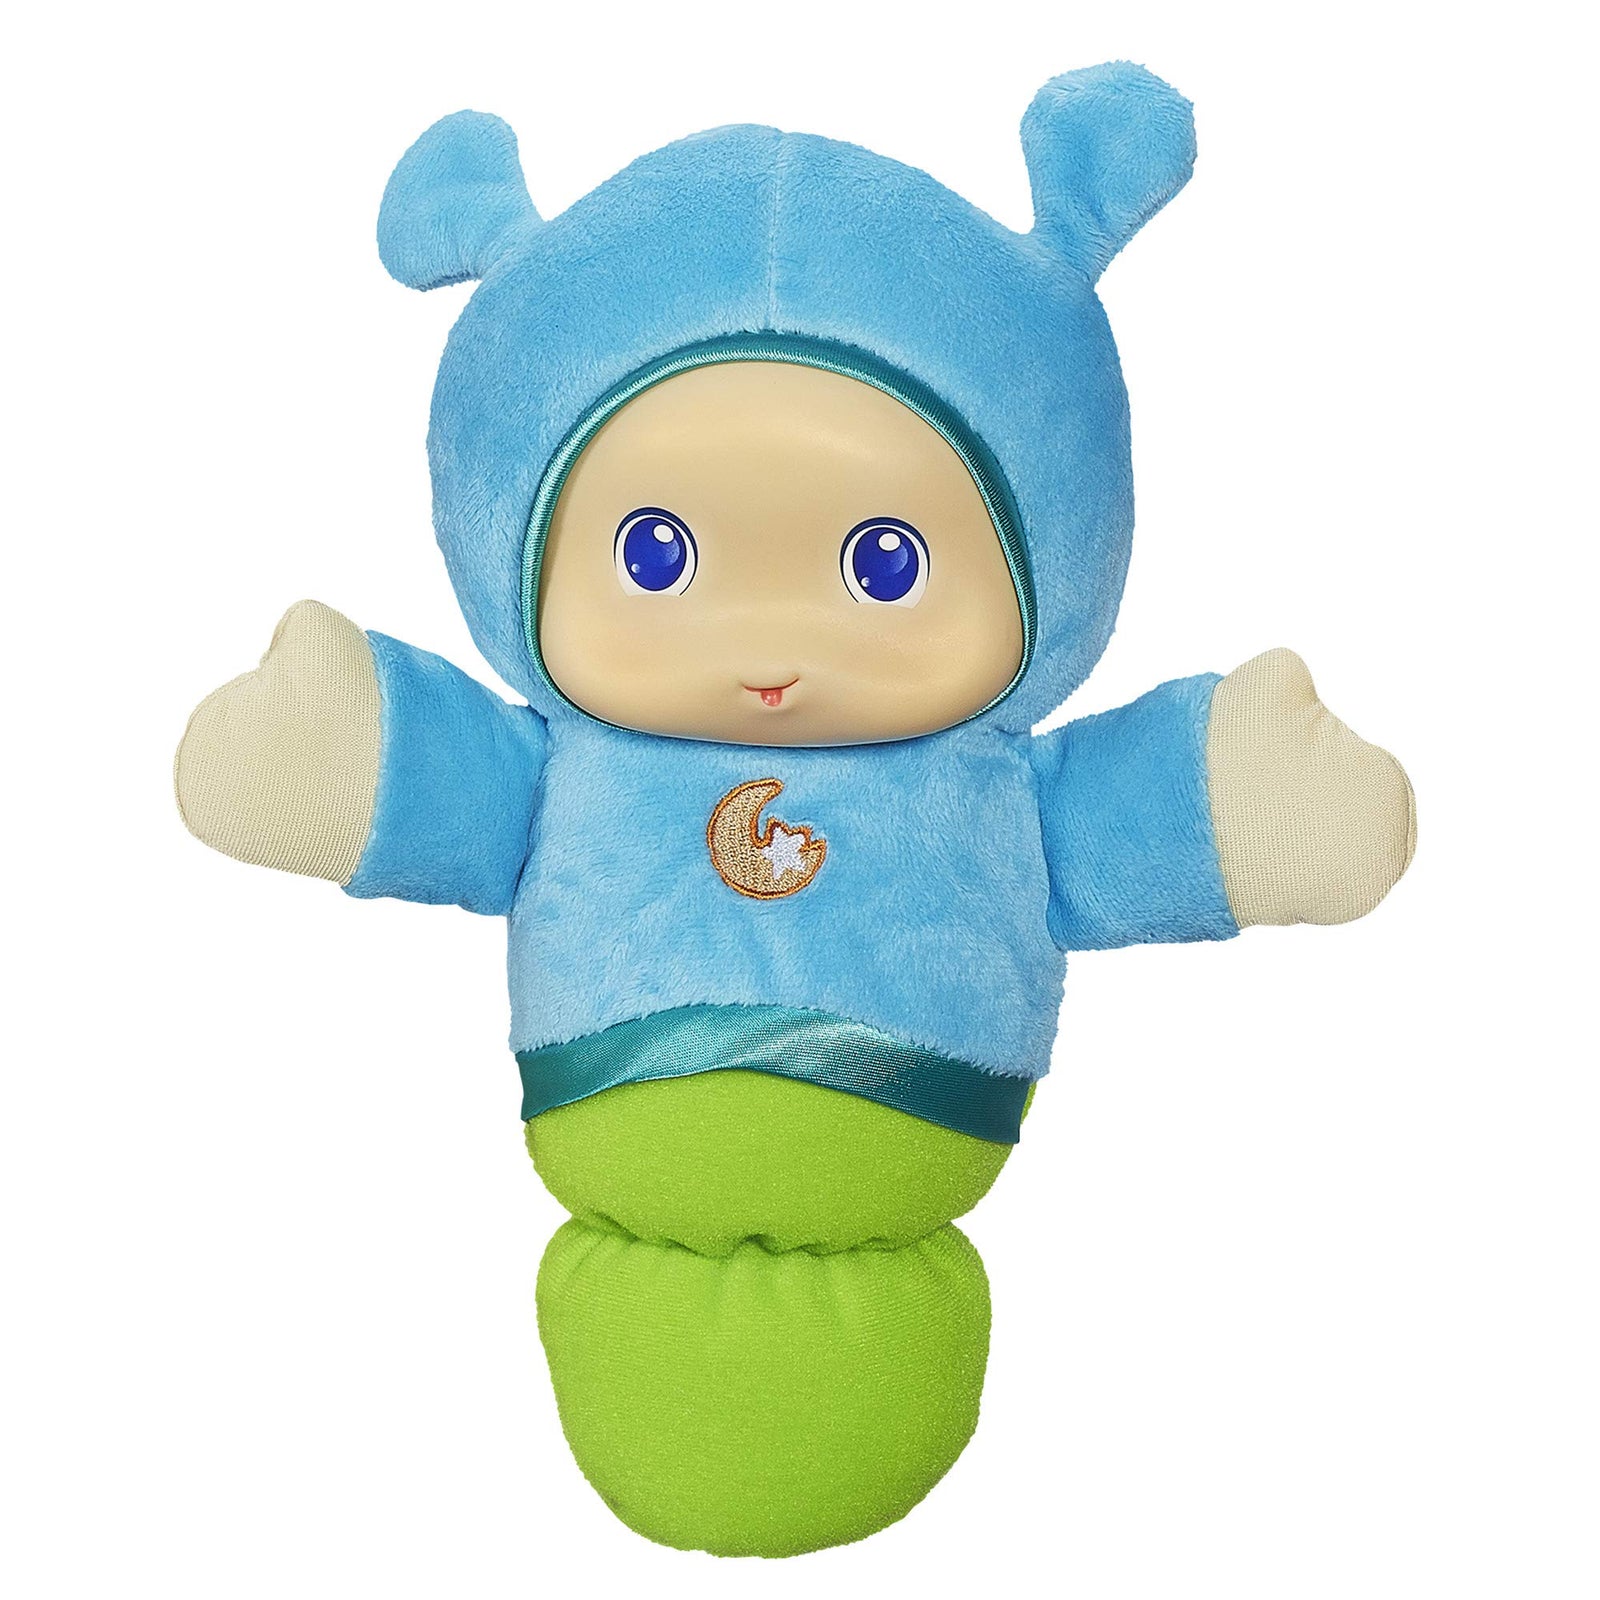 Playskool Lullaby Gloworm Toy with 6 lullaby tunes, Blue (Amazon Exclusive) Blue, Green